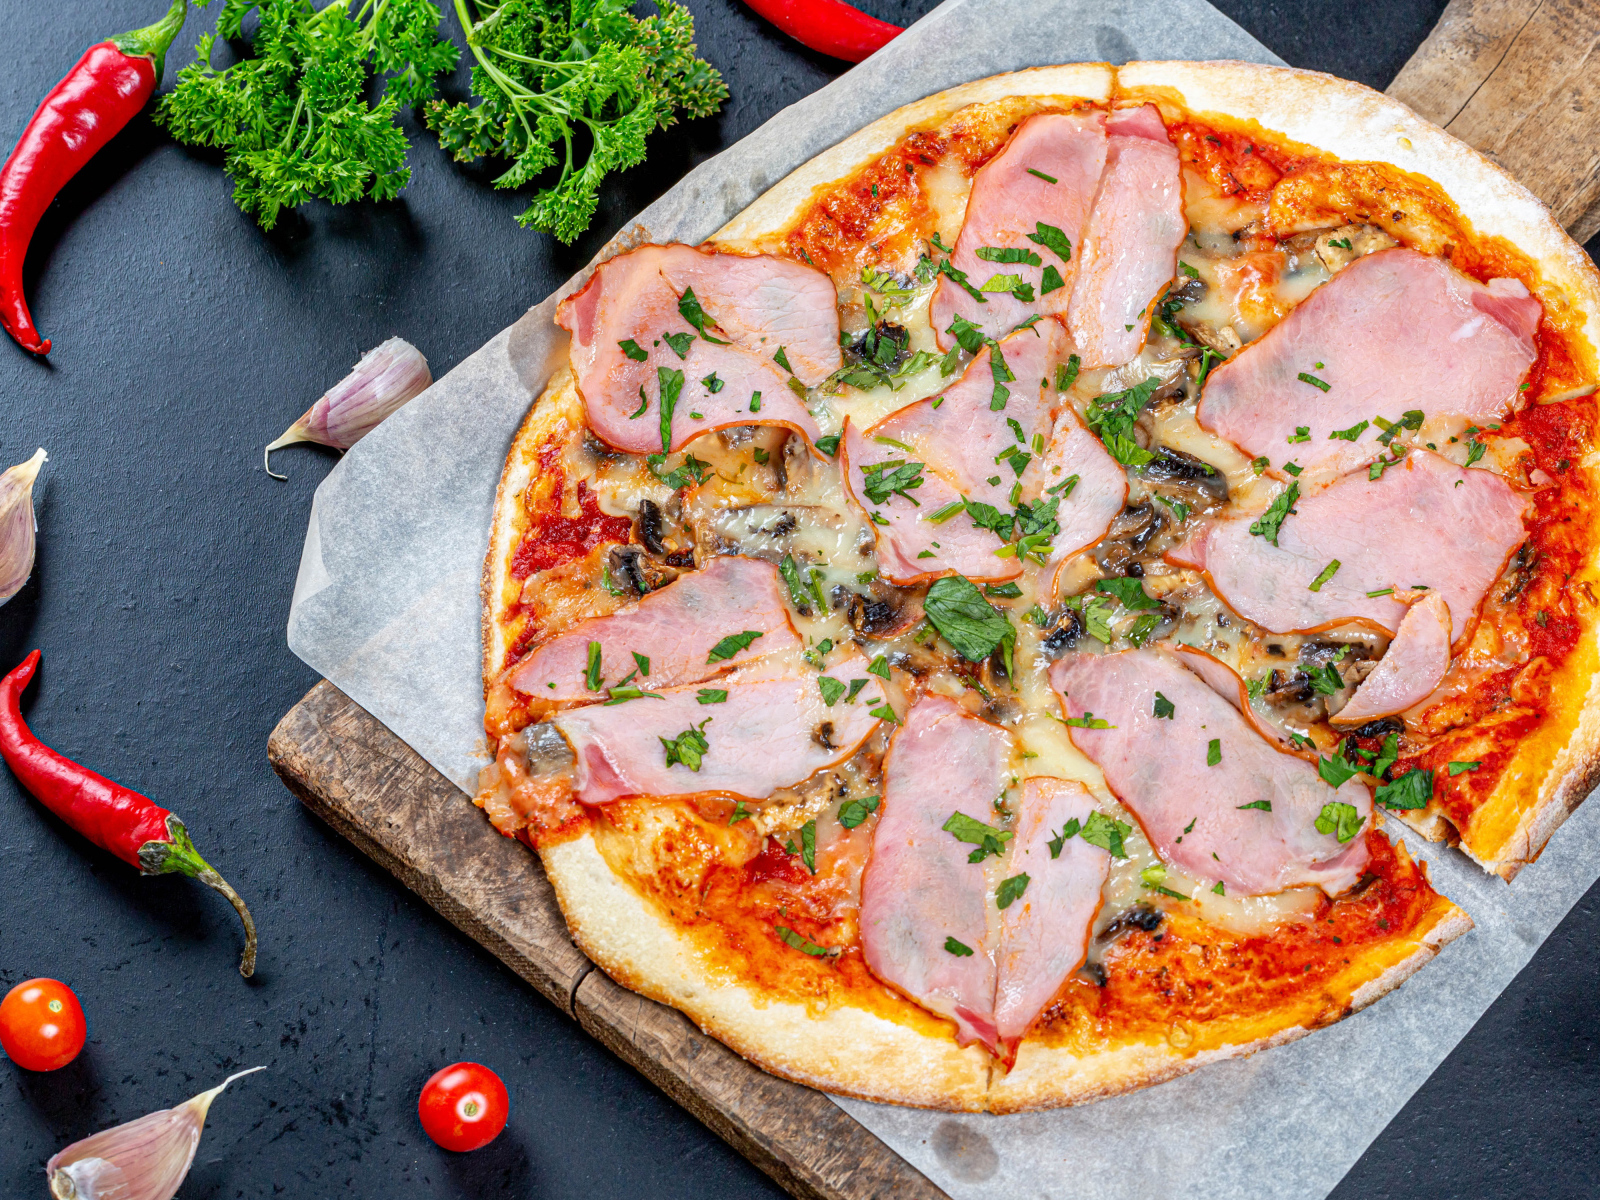 Pizza with ham and mushrooms on a table with chili pepper, garlic and parsley